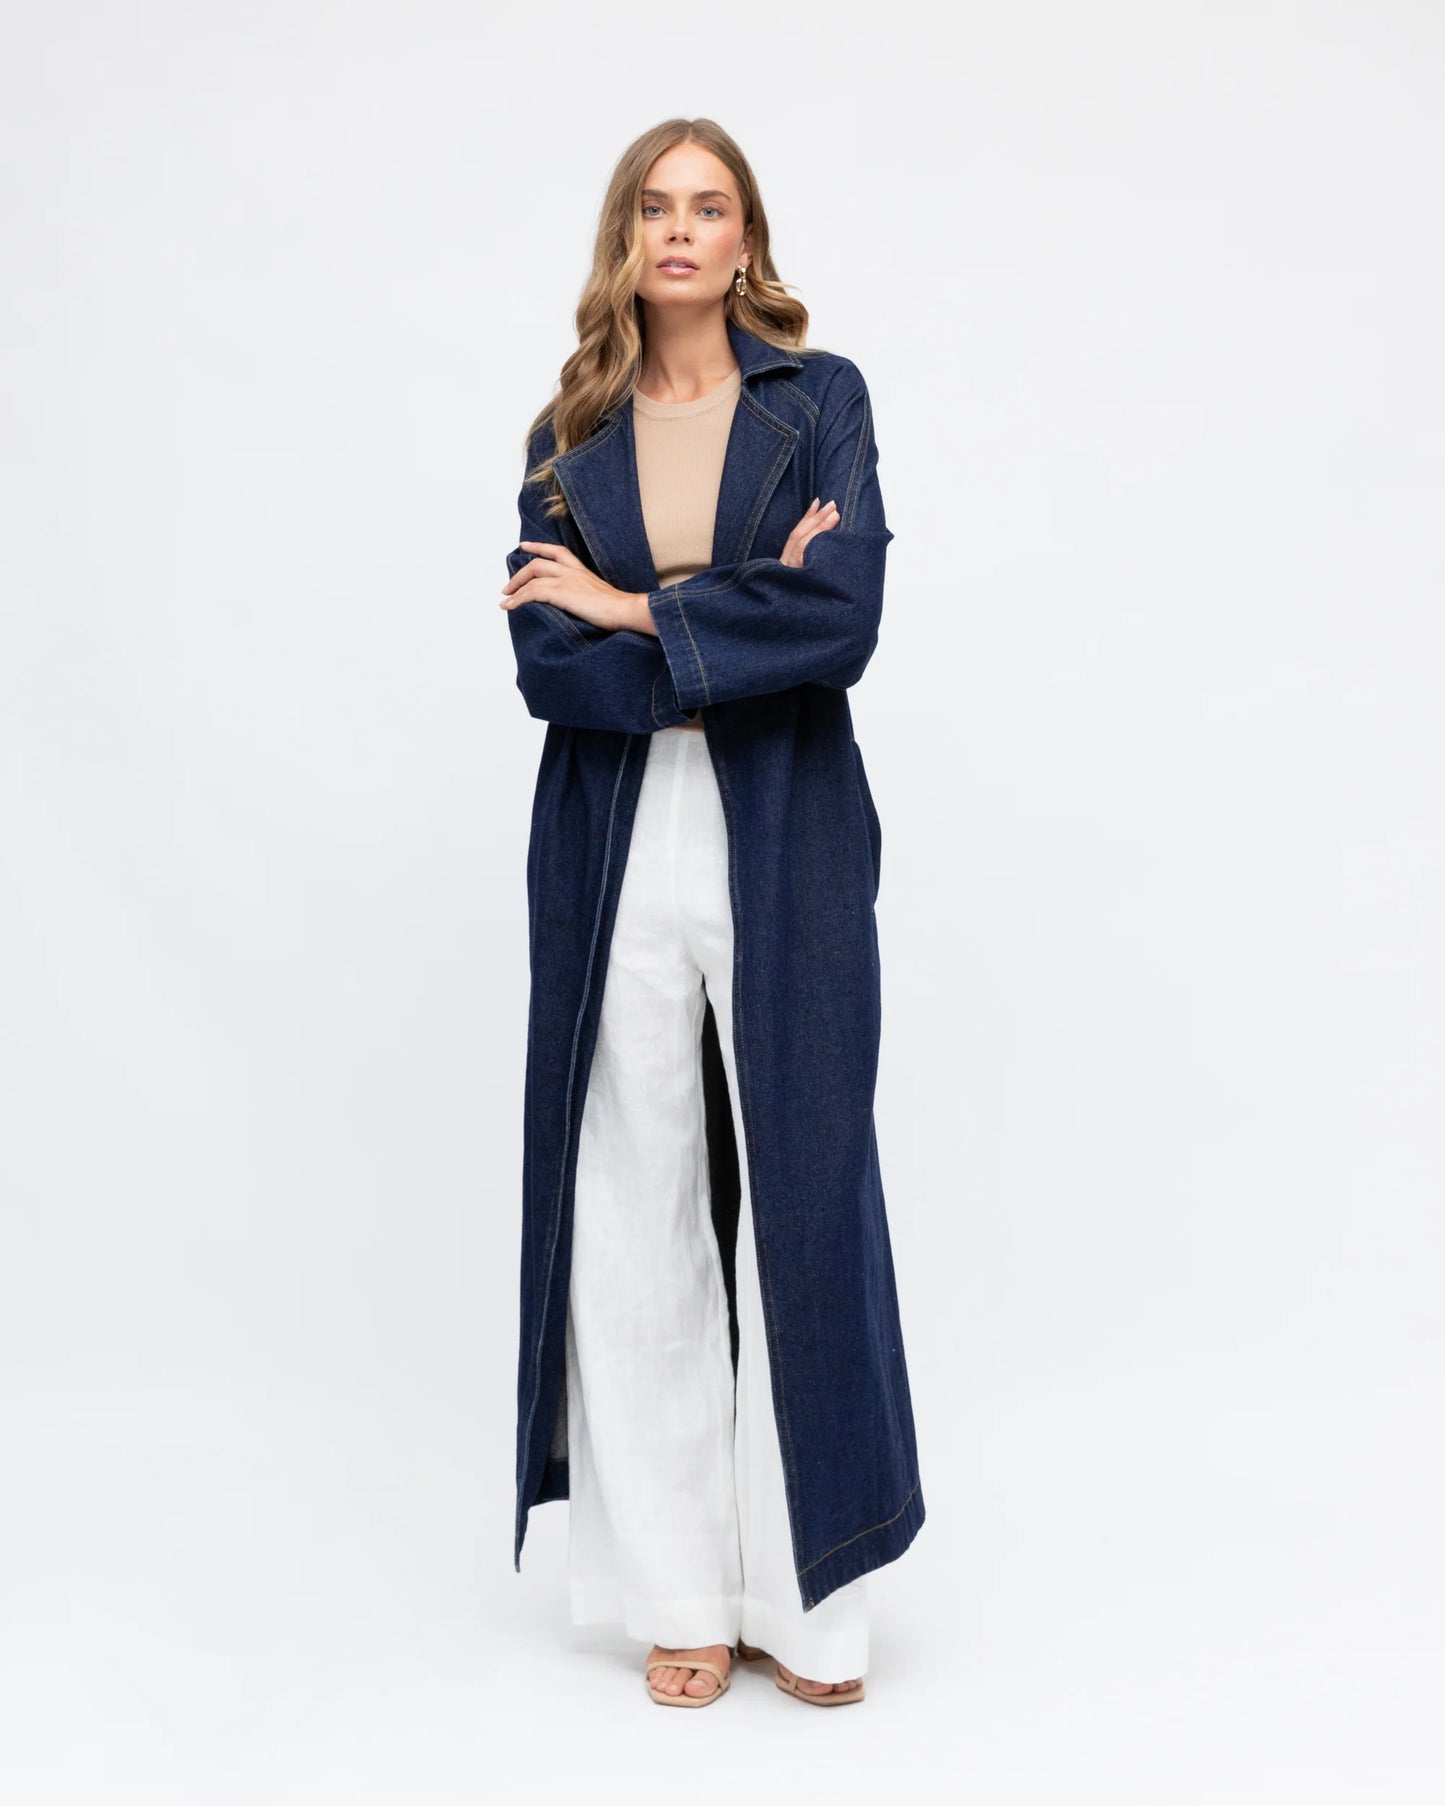 Asher Belted Denim Trench